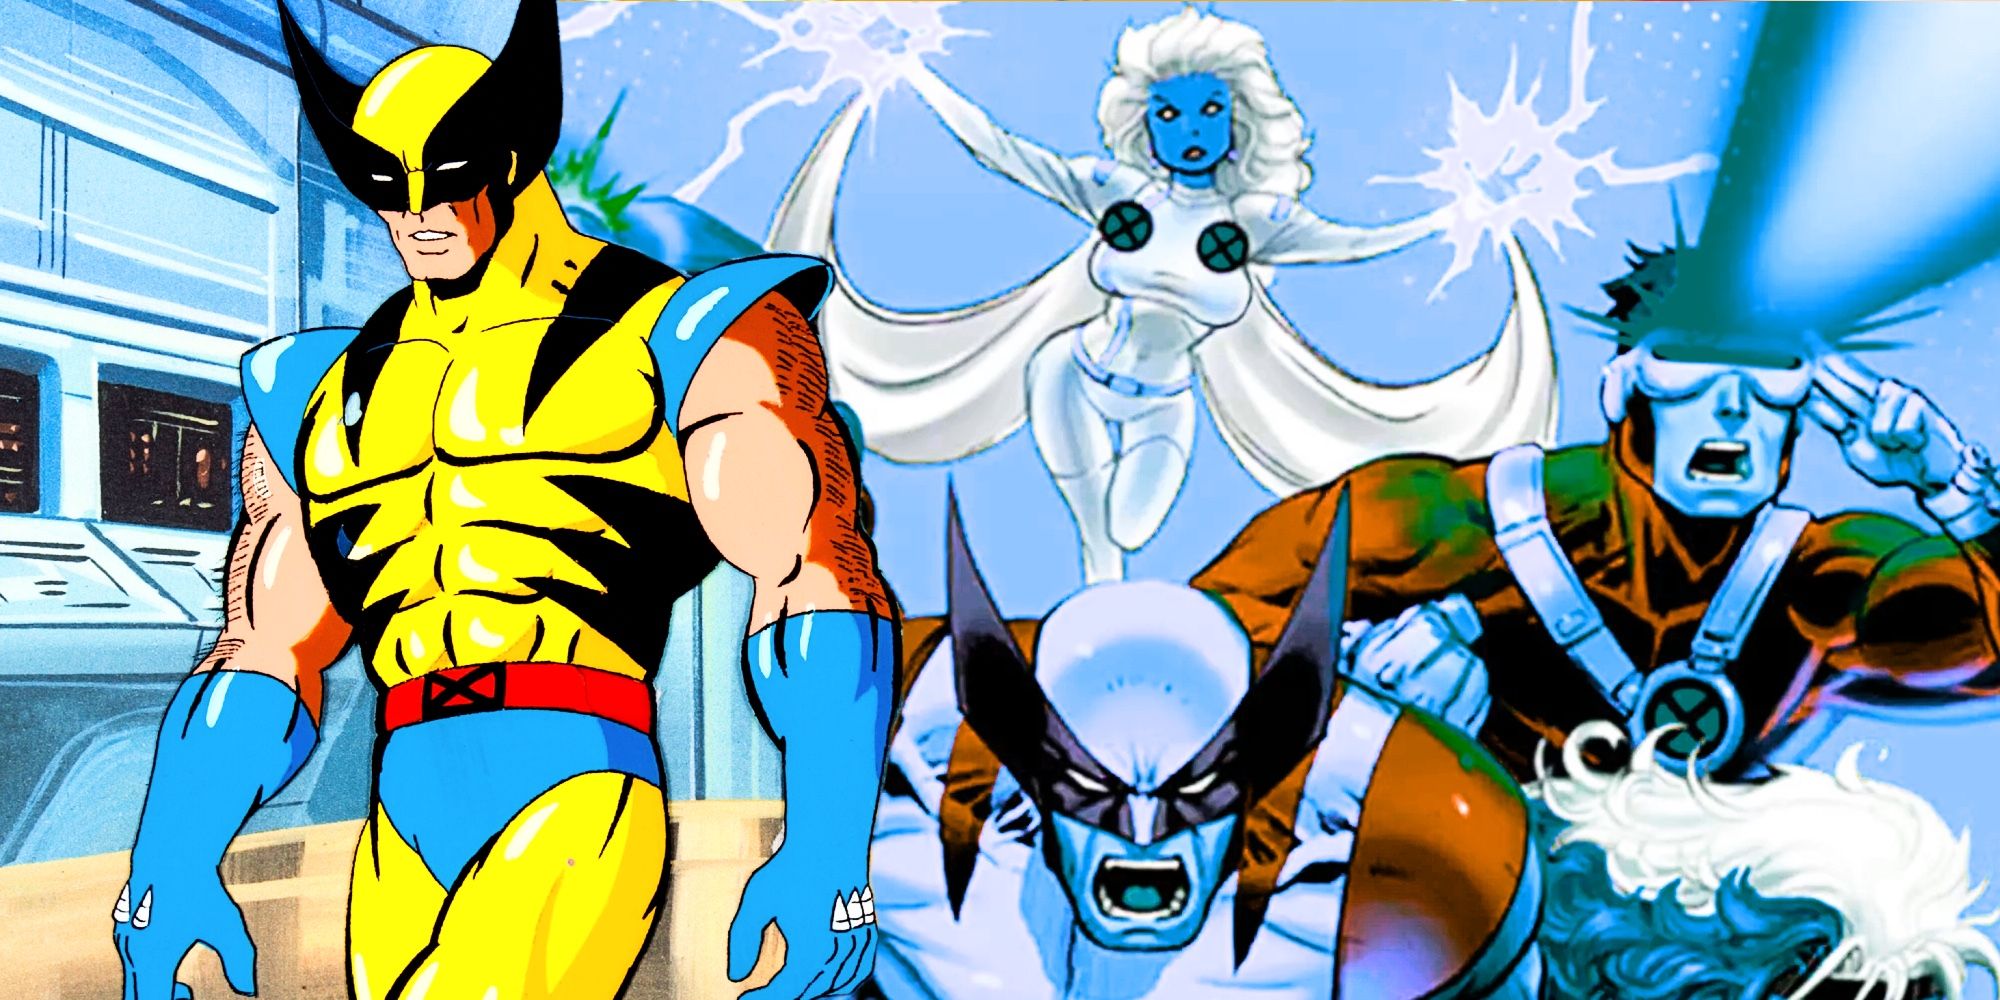 X-Men '97: What to Expect From the Animated Marvel Sequel Series